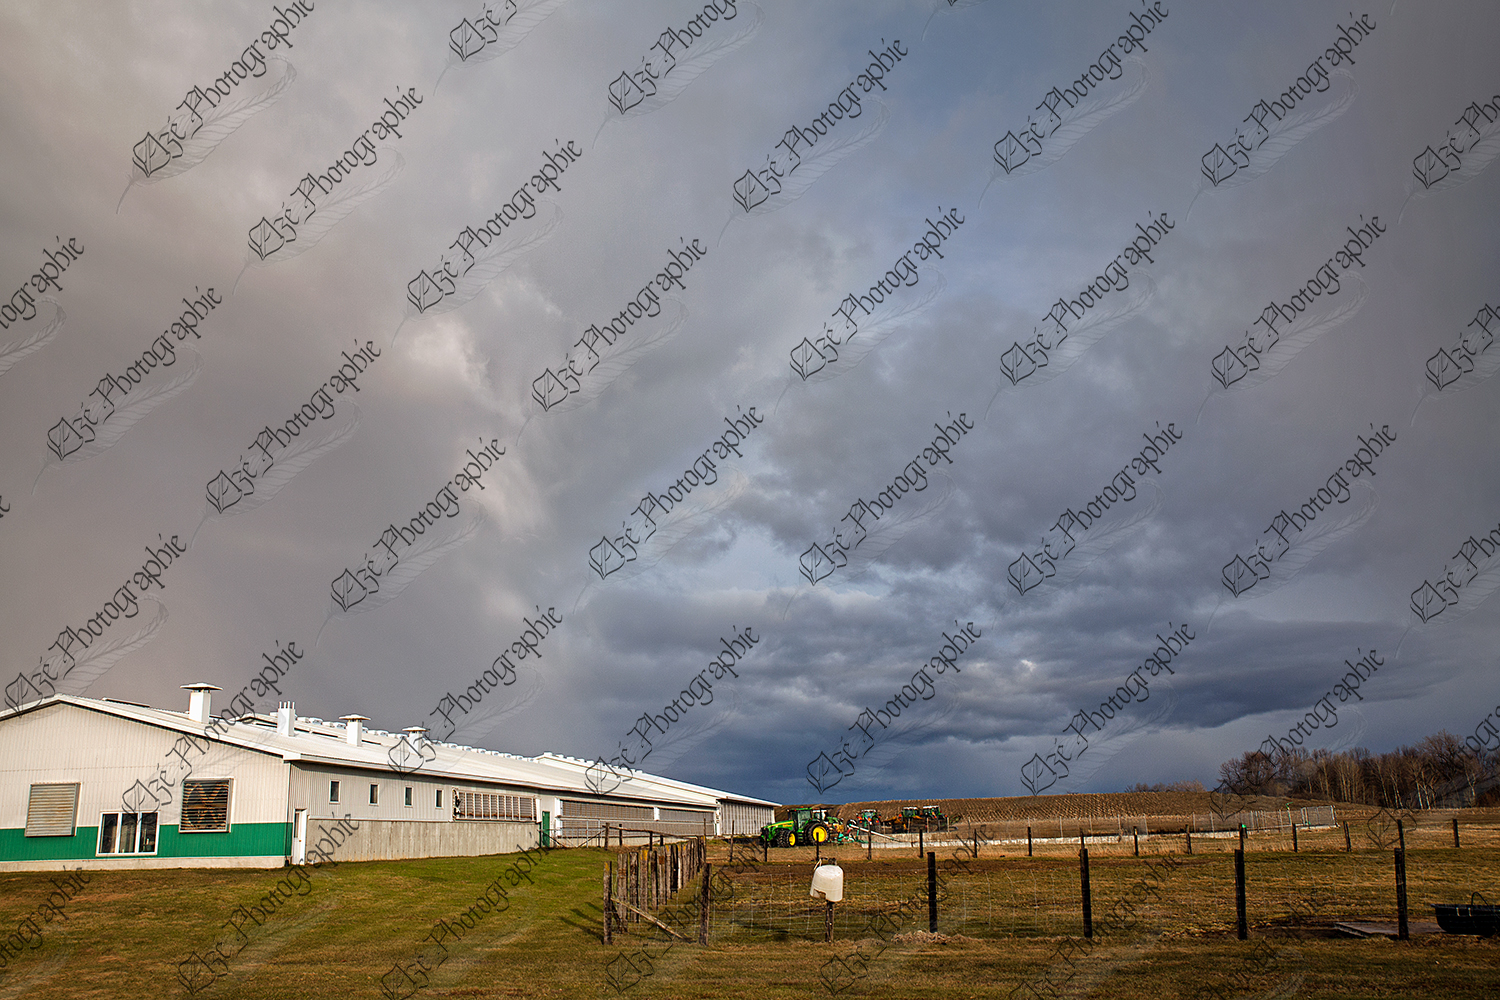 elze_photo_7824_ferme_pacage_ete_agricultural_tractor